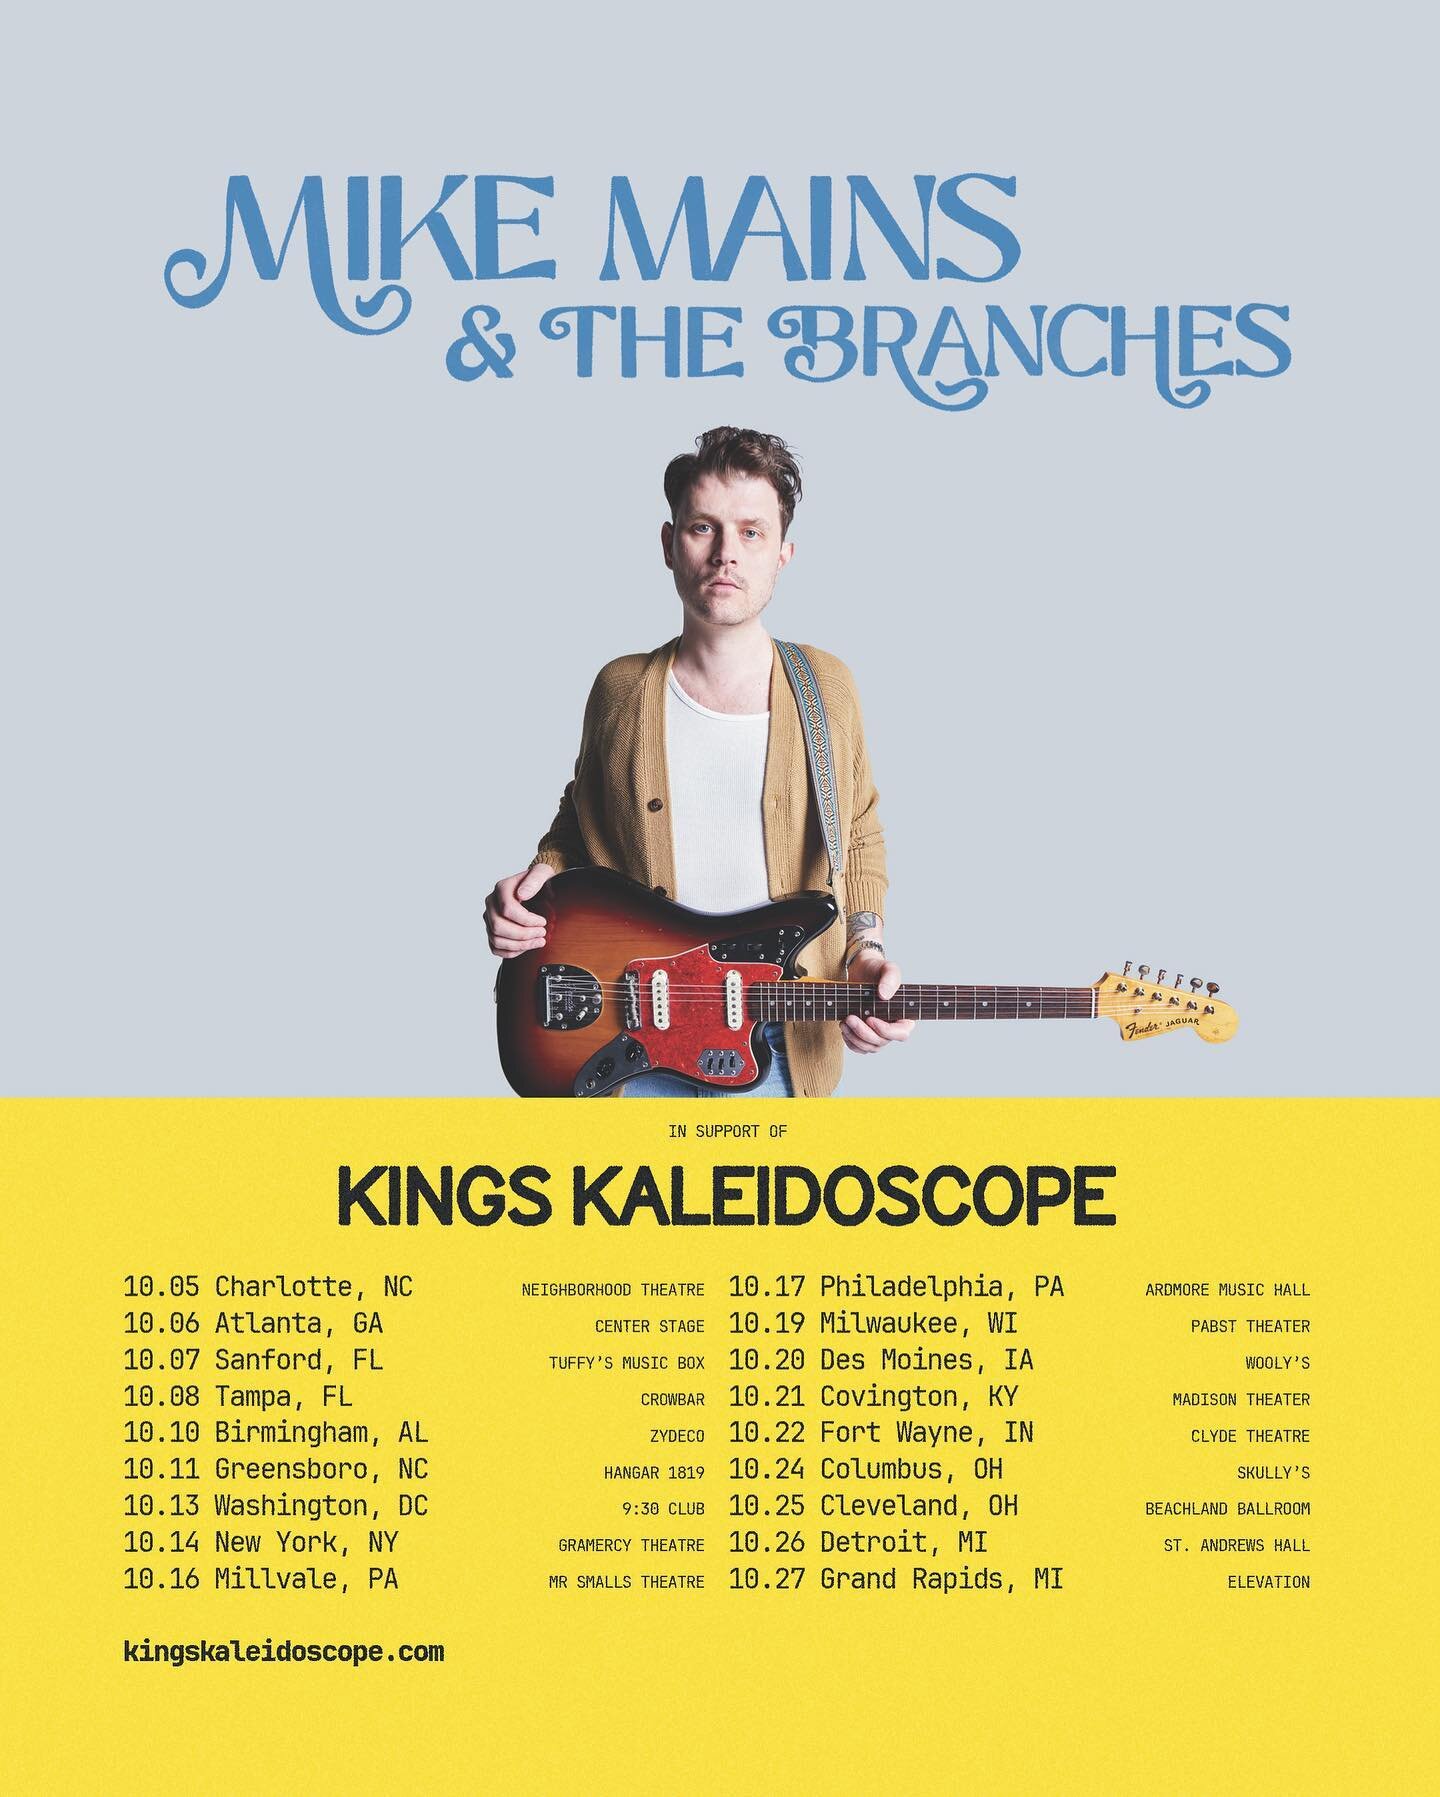 Mike Mains &amp; the Branches are touring this fall with Kings Kaleidoscope.